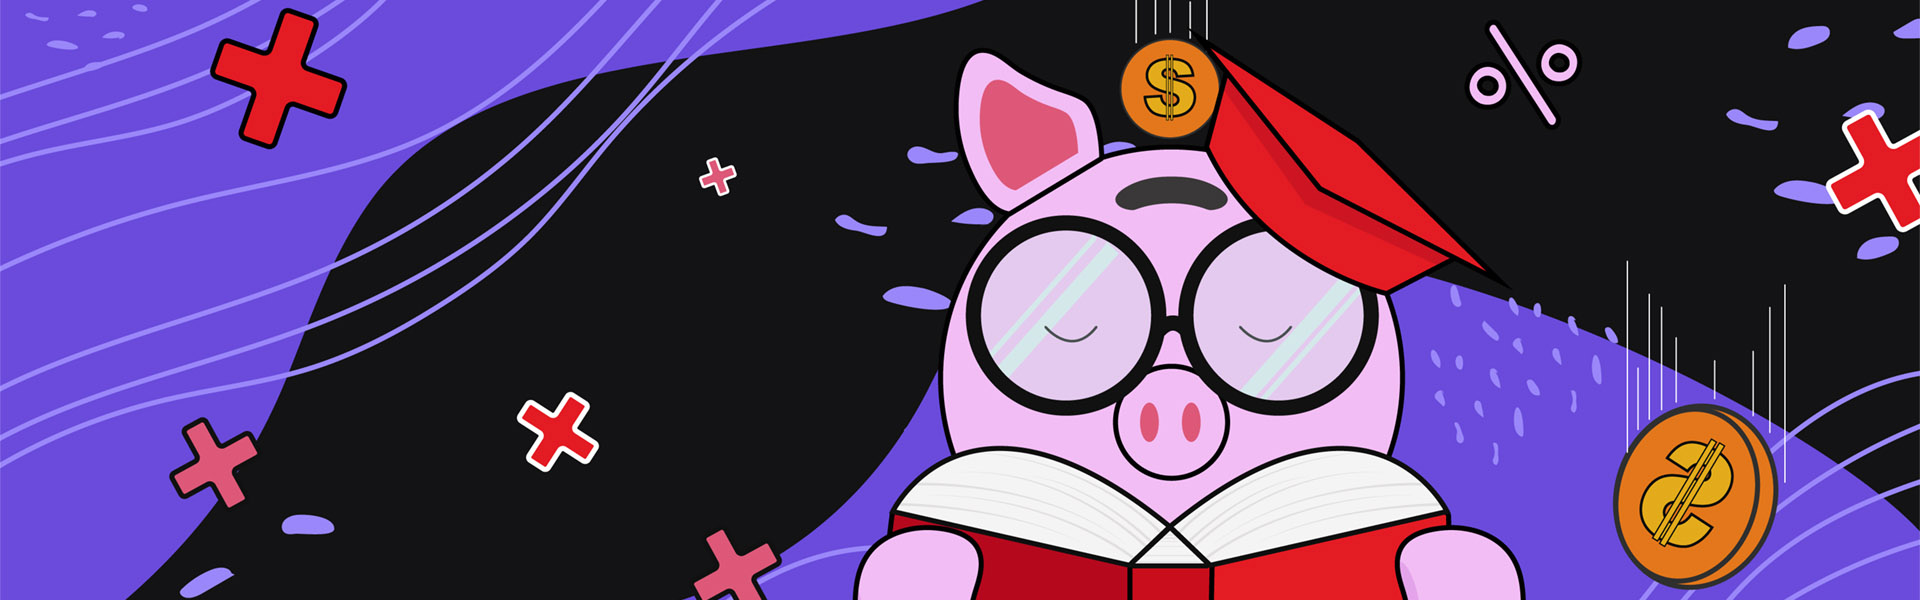 Illustration of a piggy bank cartoon character reading a book, sitting on a stack of books, with a calculator, money and mathematical symbols in the background.